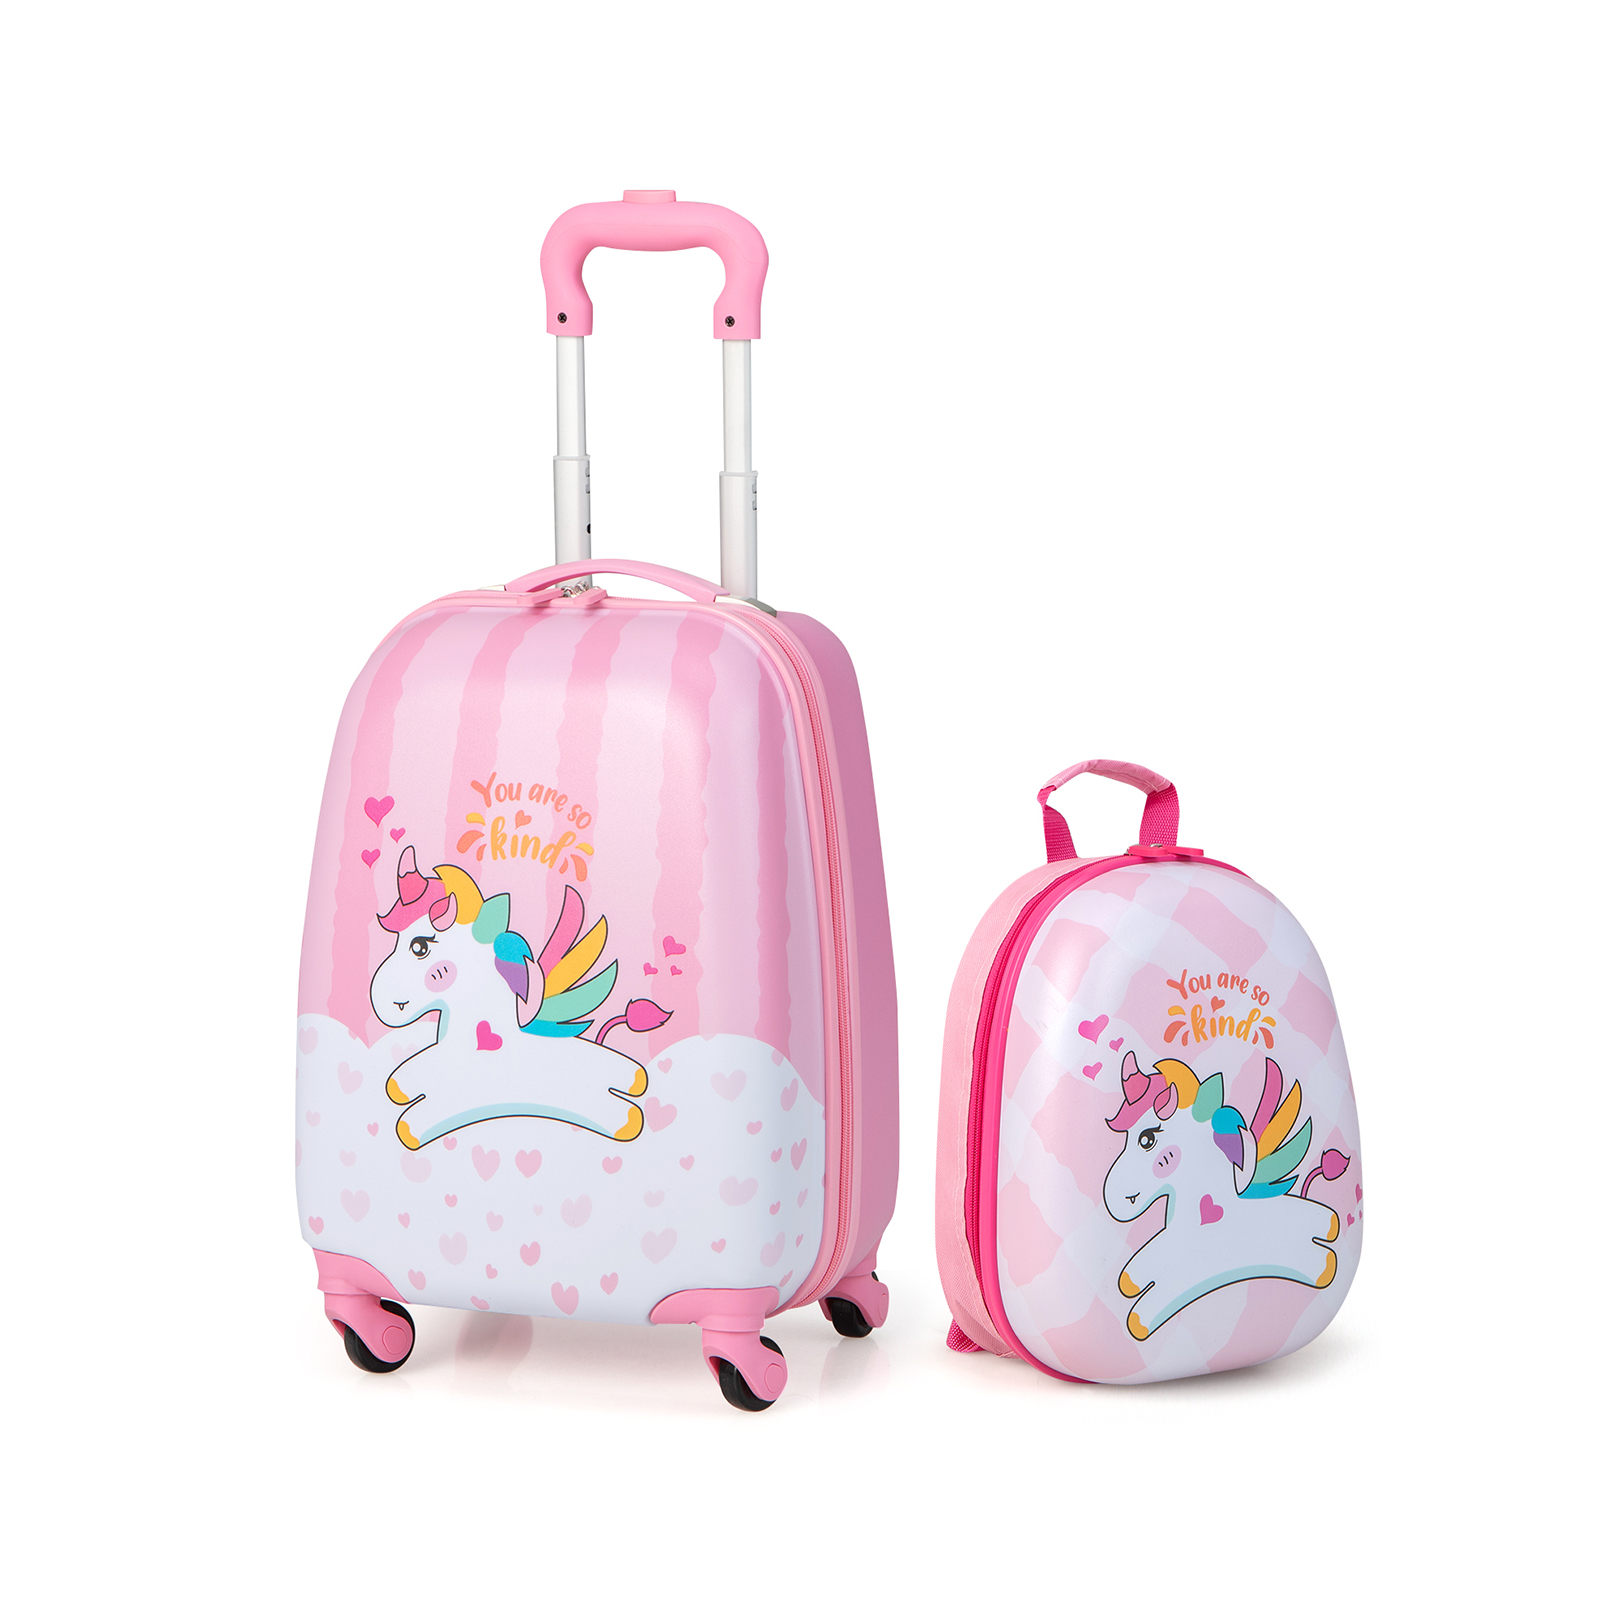 2 Piece Kids Luggage Set with Spinner Wheels and Lightweight Design-Pink